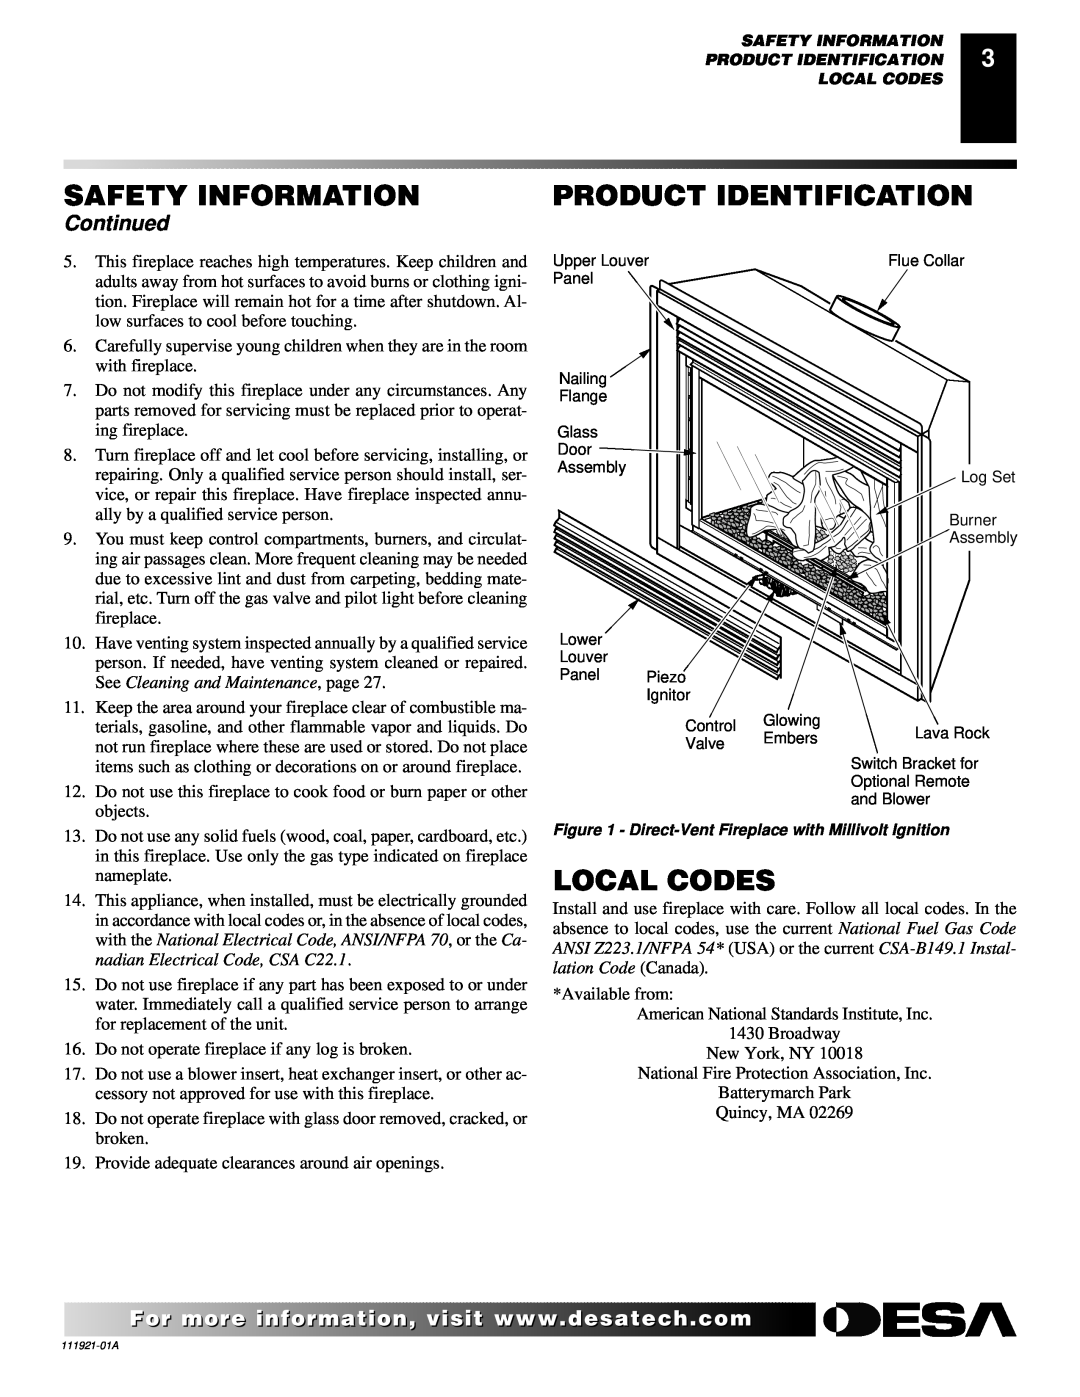 Desa (V)K42N installation manual Product Identification, Local Codes, Continued, Safety Information 